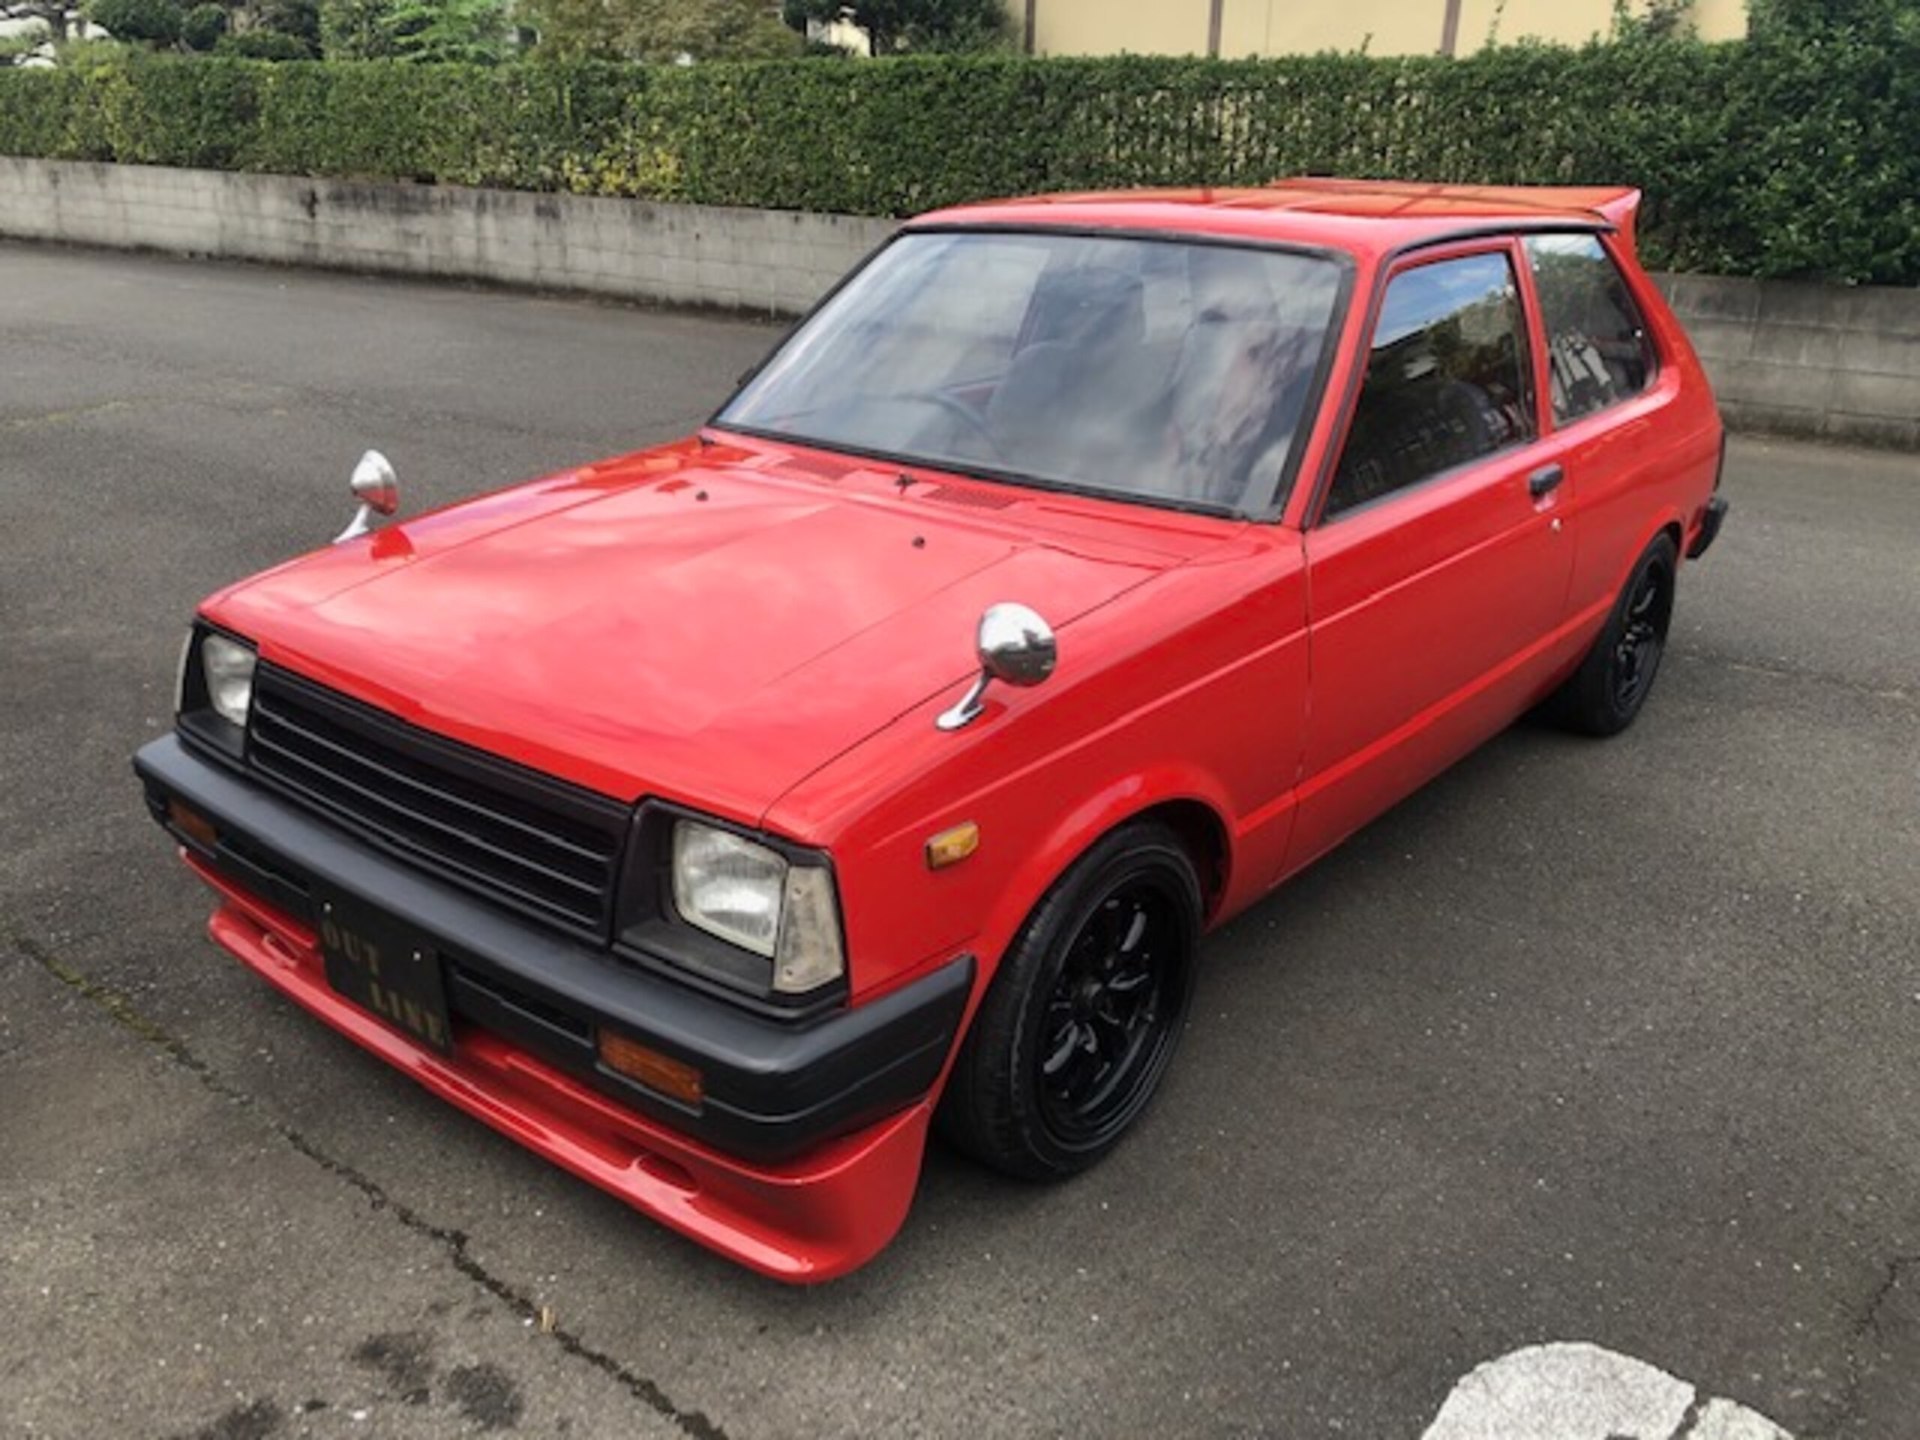 Kp61 Starlet 3dr Dx A 5mt 1000km トヨタ スターレット3dr Dx A 5速 Kp61 レッド 車両本体価格 198 0万円 Jdm 中古車紹介 Introducing Of Jdm Used Car